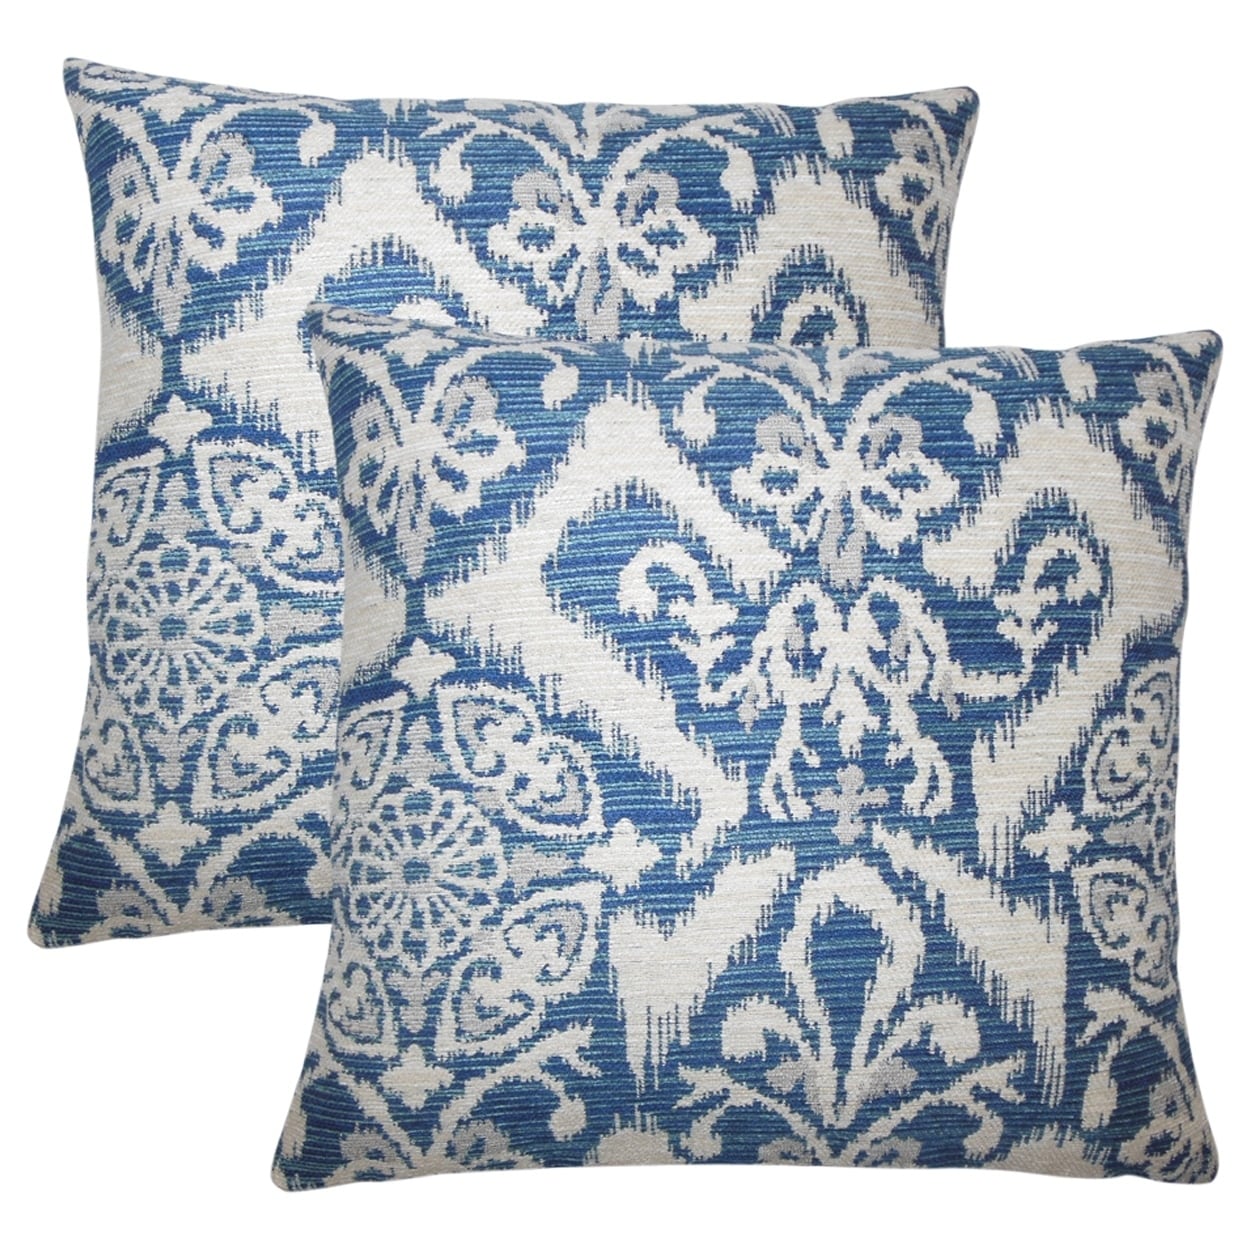 The Pillow Collection Set of 2  Ingalill Ikat Throw Pillows in Indigo - image 1 of 3